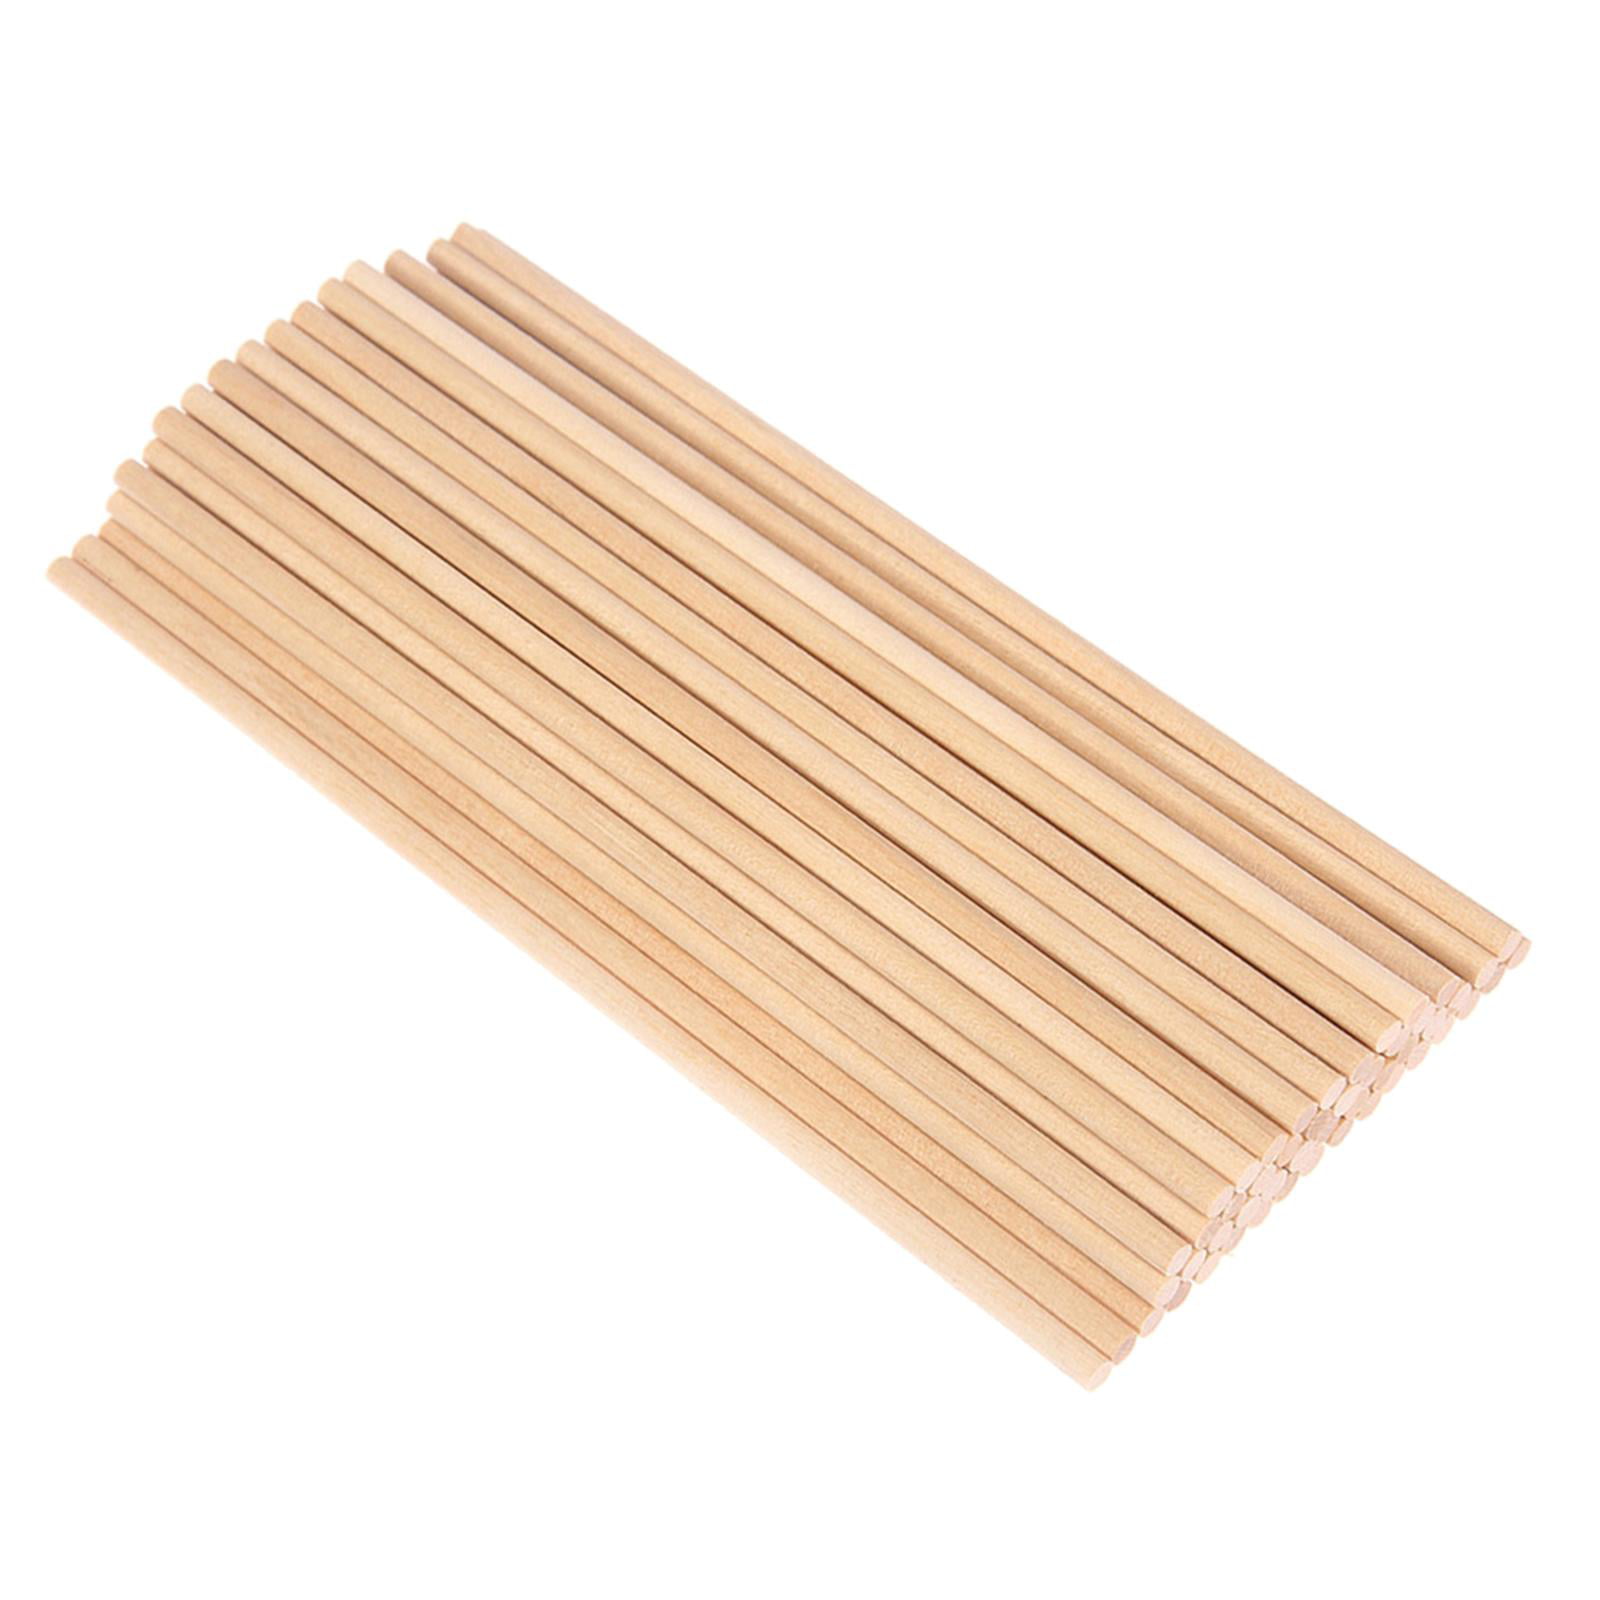 3/4 Inch Maple Dowel Rod Sticks Unfinished Wood for Hobby Crafts – VELOCITY®